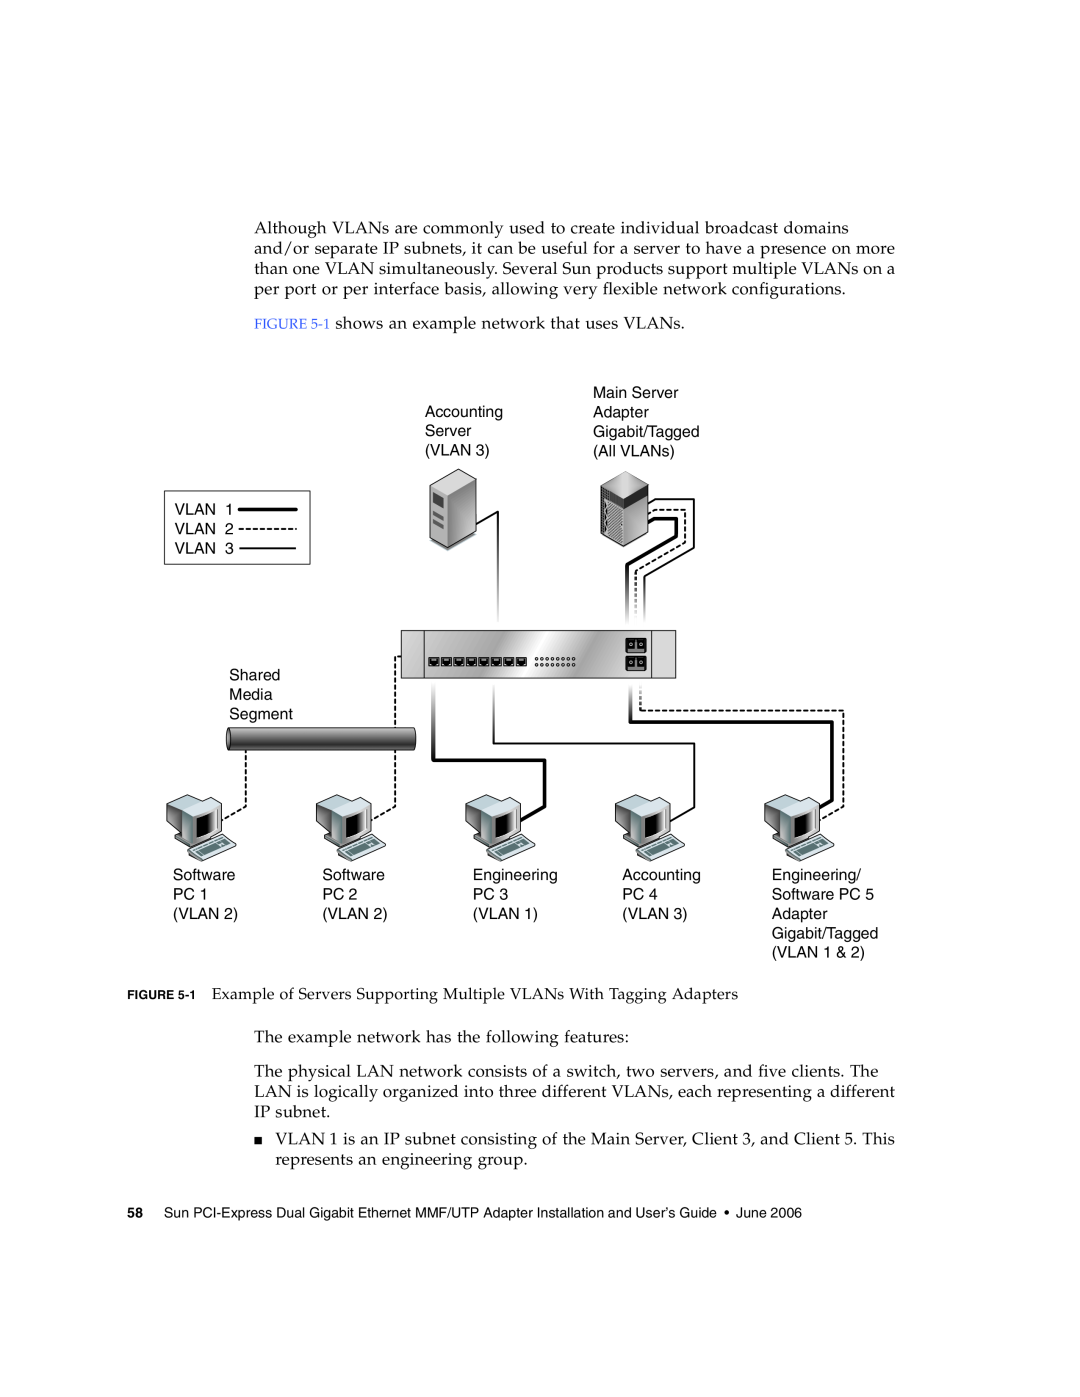 Sun Microsystems Gigabit Ethernet MMF/UTP Adapter manual 1 shows an example network that uses VLANs 